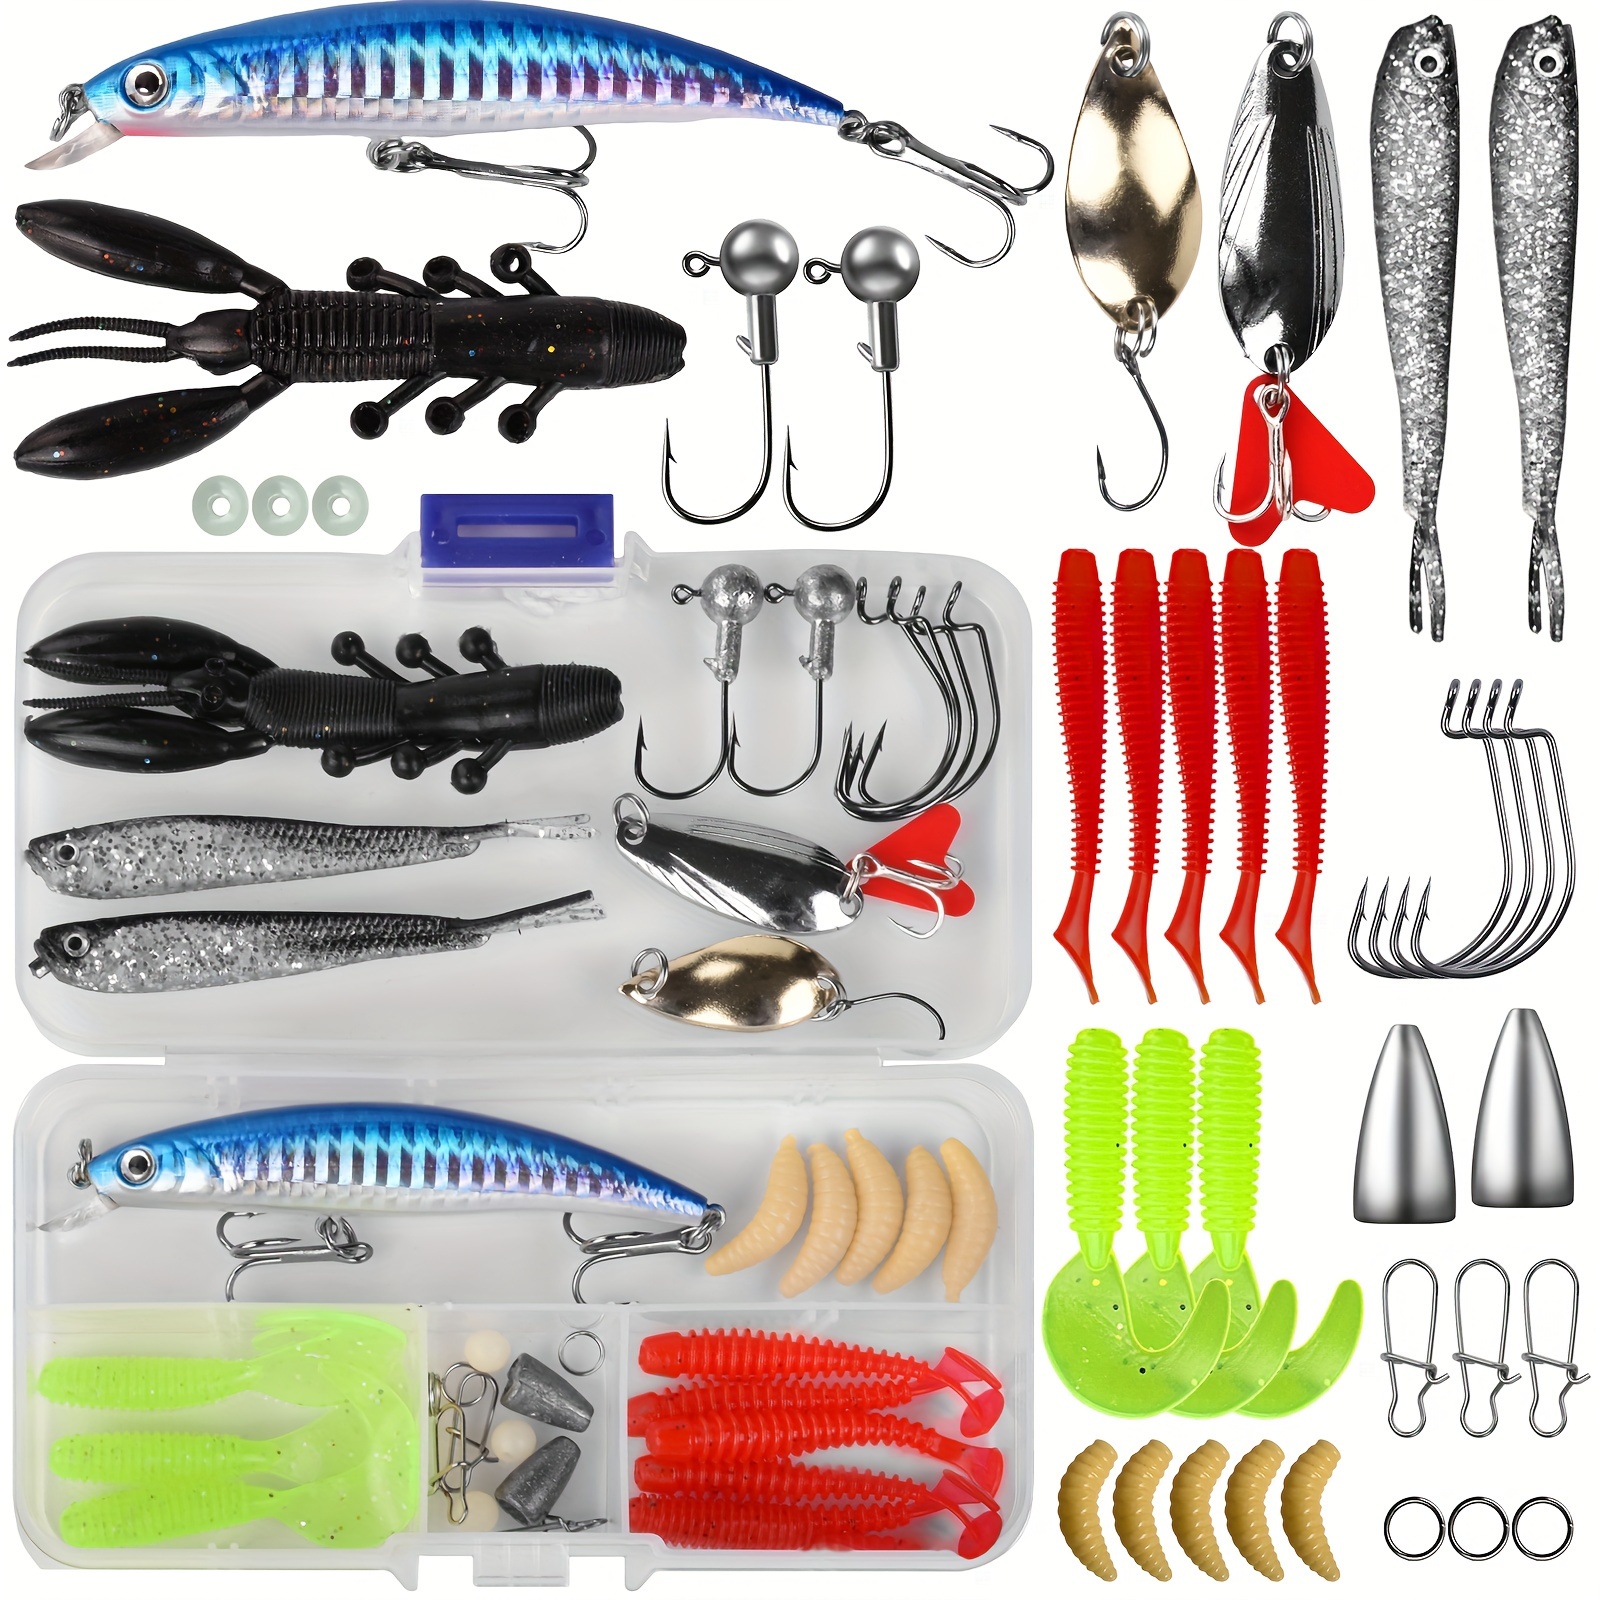 Fishing Lures for Freshwater,Fishing Lure for  Bass,Trout,Walleye,Salmon,Suitable for Fresh&Saltwater,Lifelike Fish Bait  Plastic Worms,Fishing Tackle